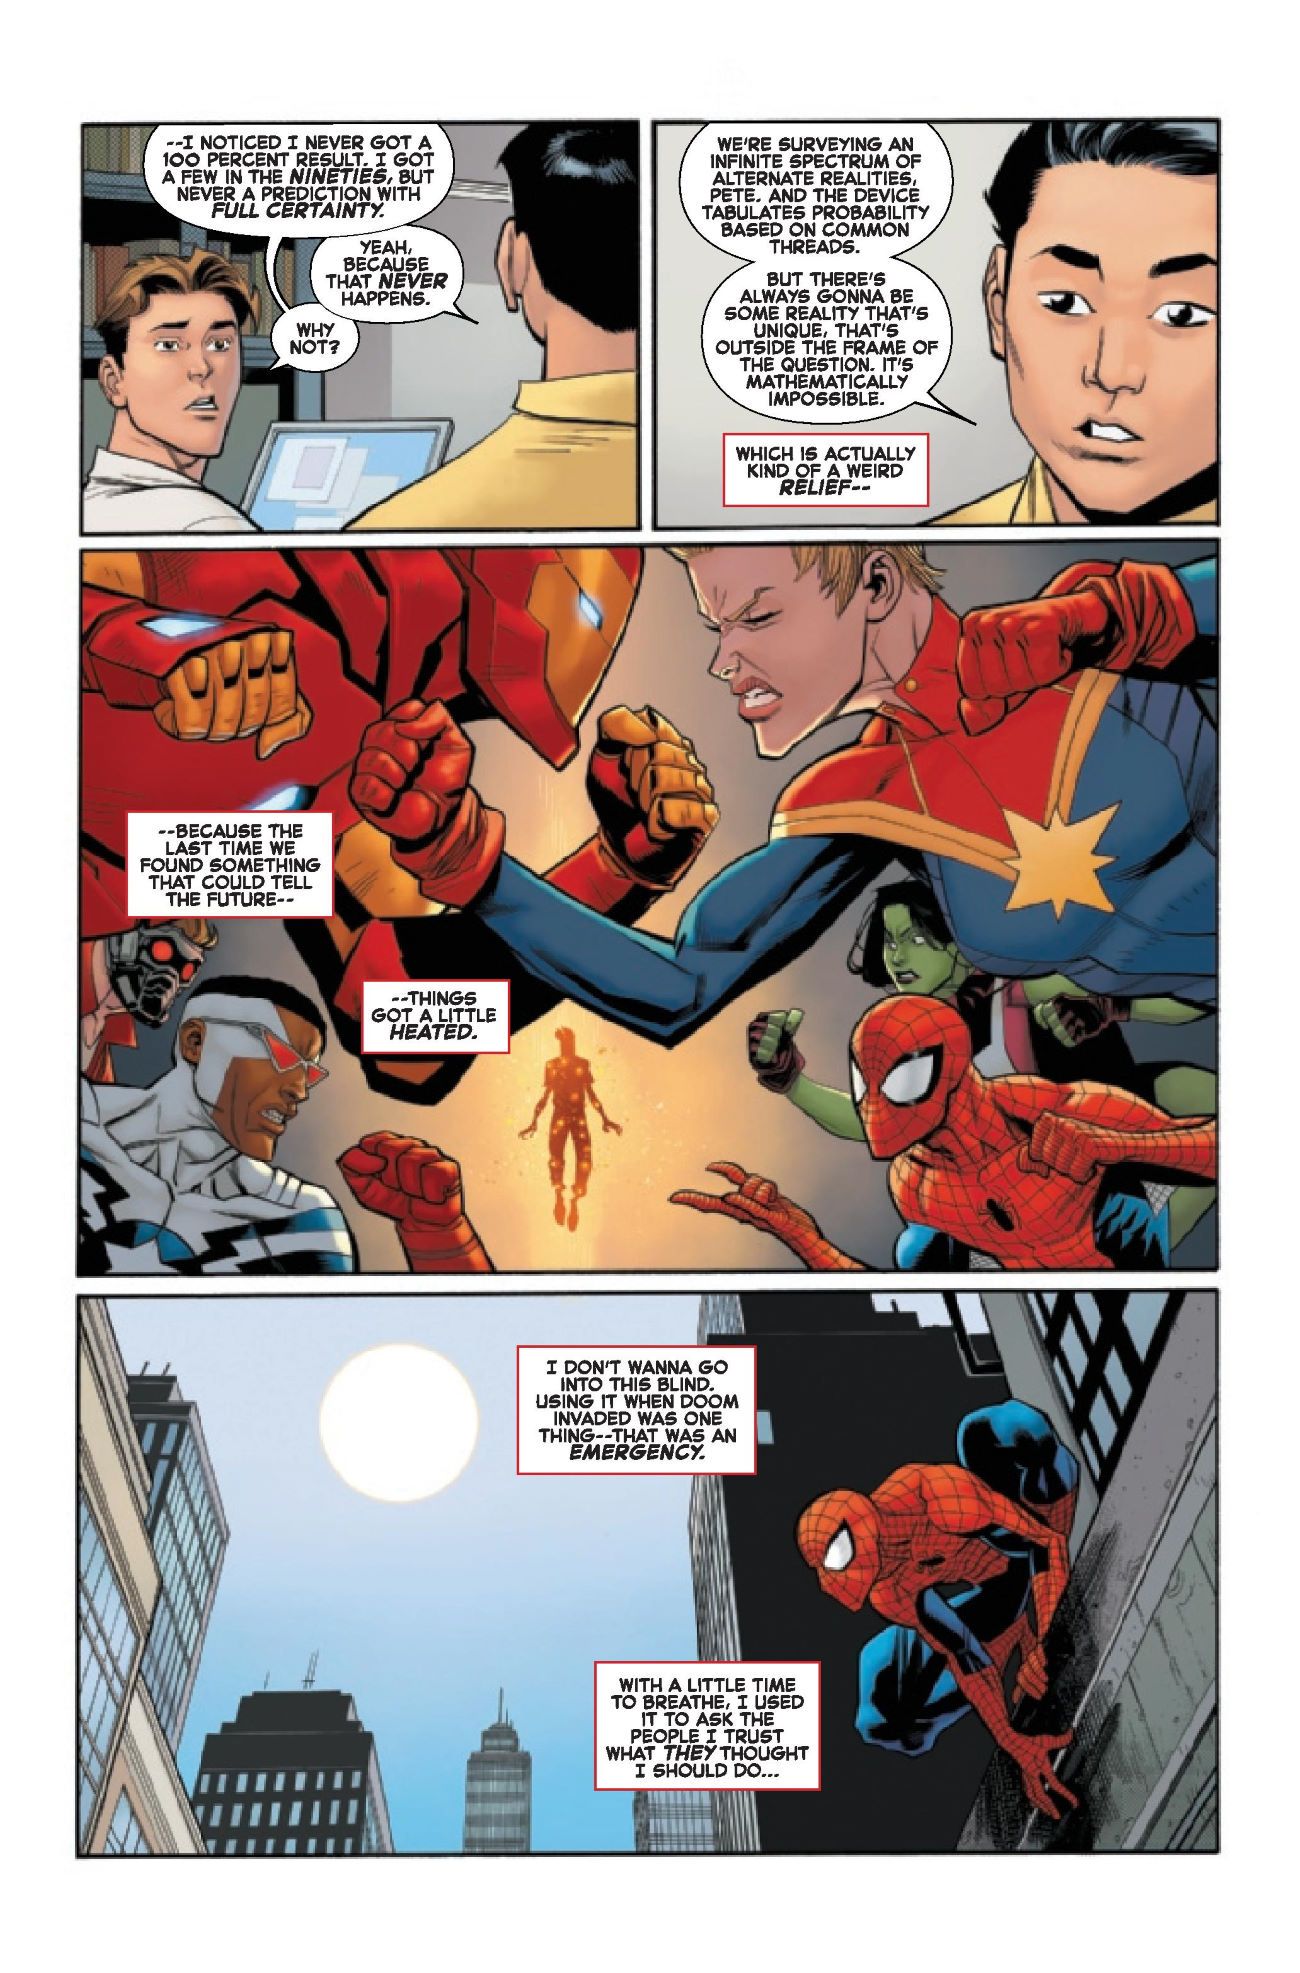 Amazing Spider-Man 37 Comic Preview 3